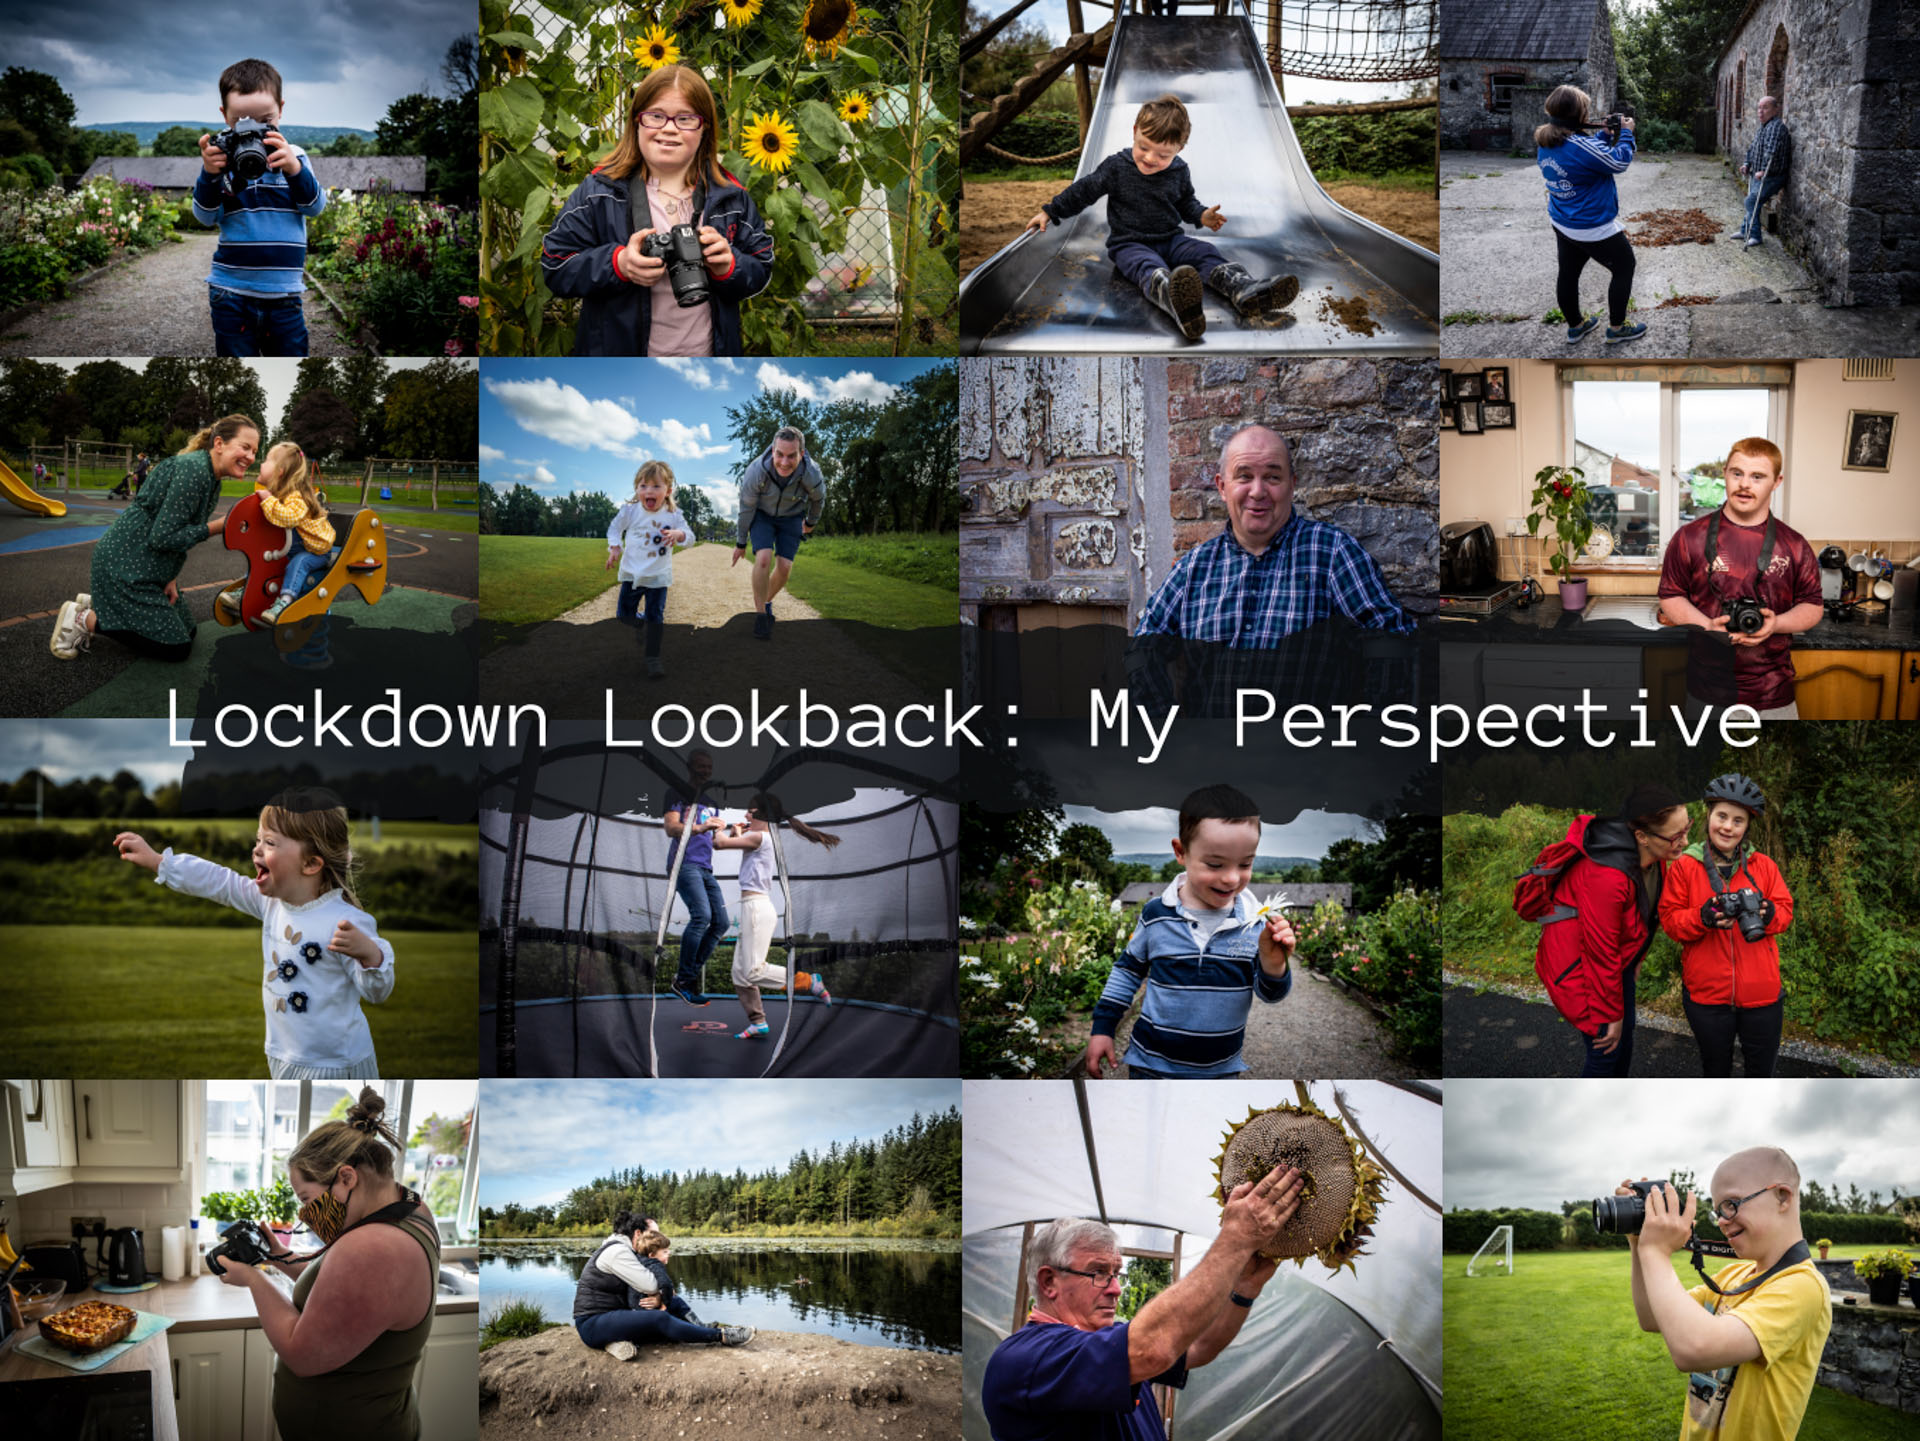 Down Syndrome Limerick Photography exhibition shares the experiences of people with Down syndrome during Covid